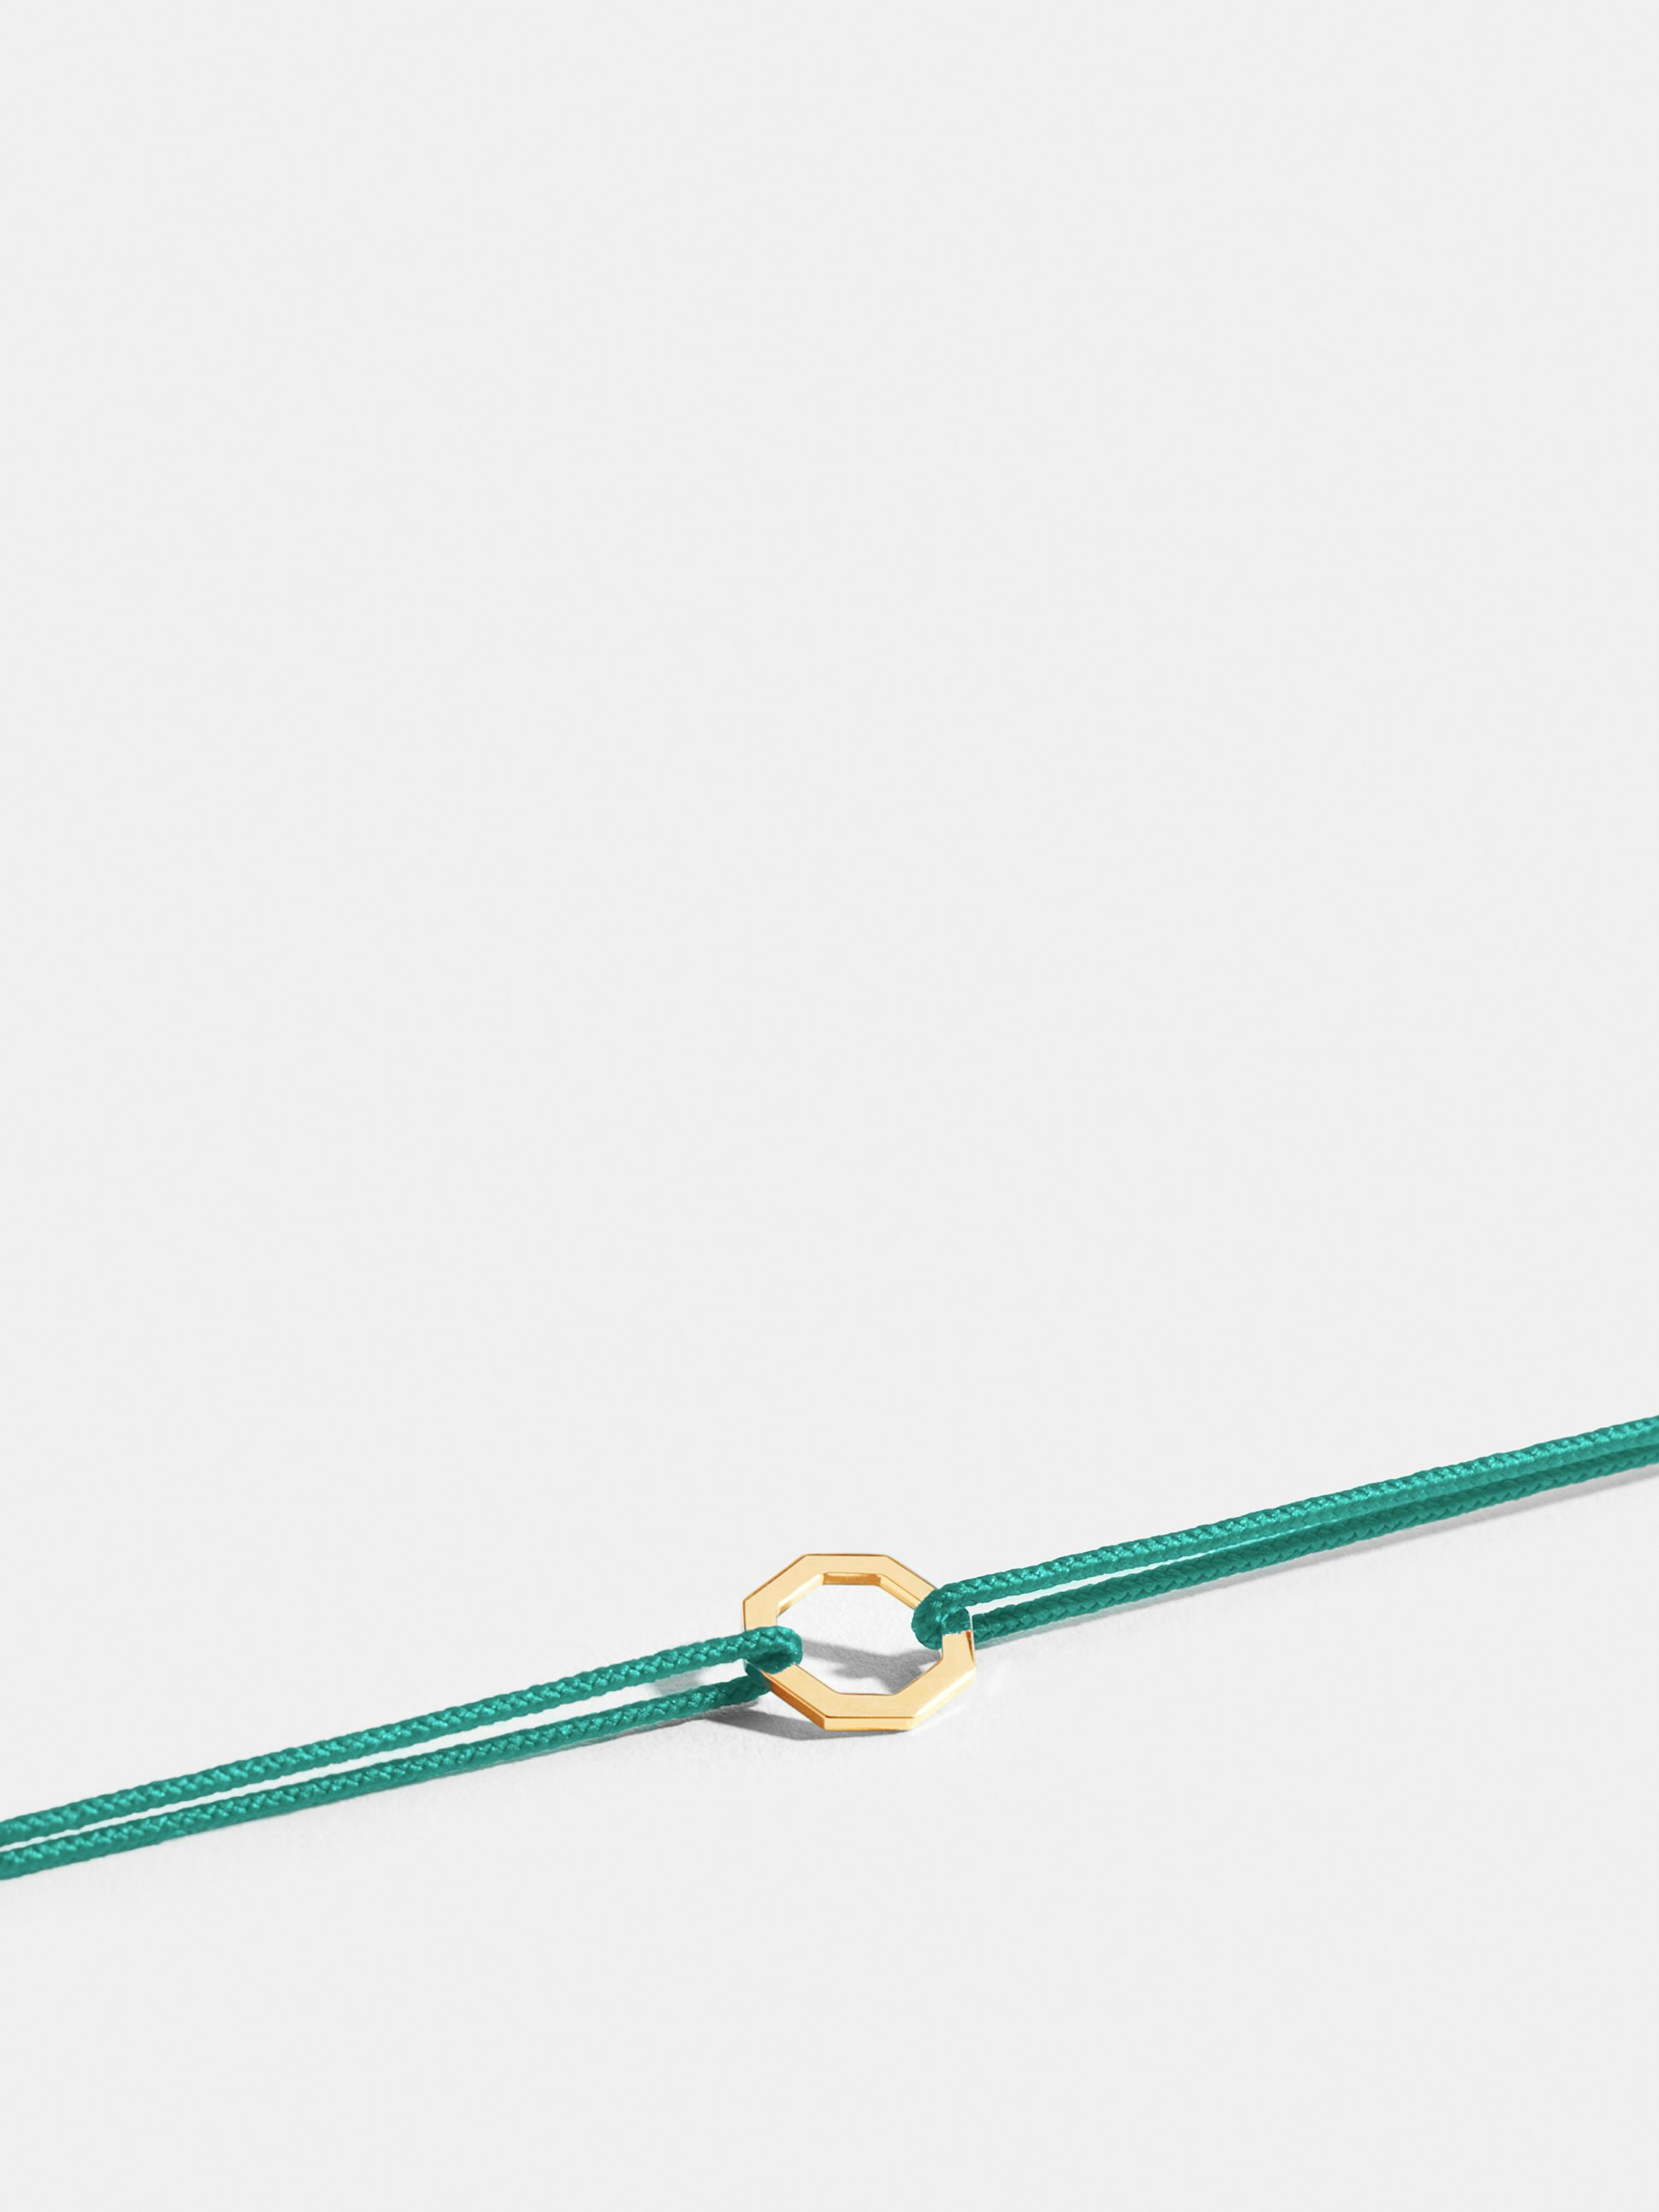 Octogone motif in 18k Fairmined ethical yellow gold, on a turquoise blue cord. 